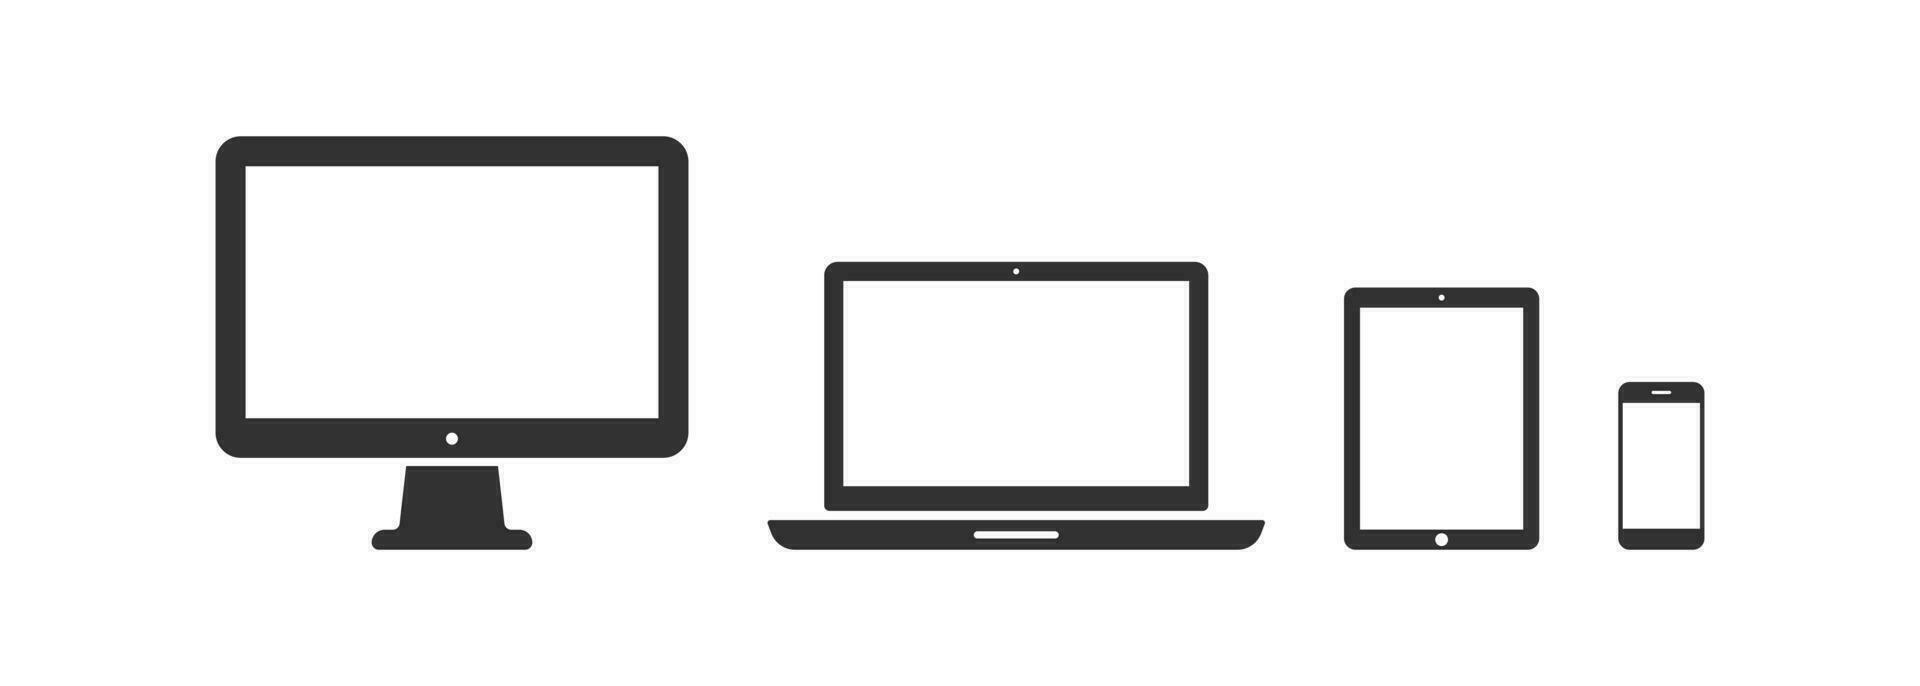 PC icon. Laptop signs. Tablet symbol. Phone symbols. Digital device icons. Black color. Vector isolated sign.